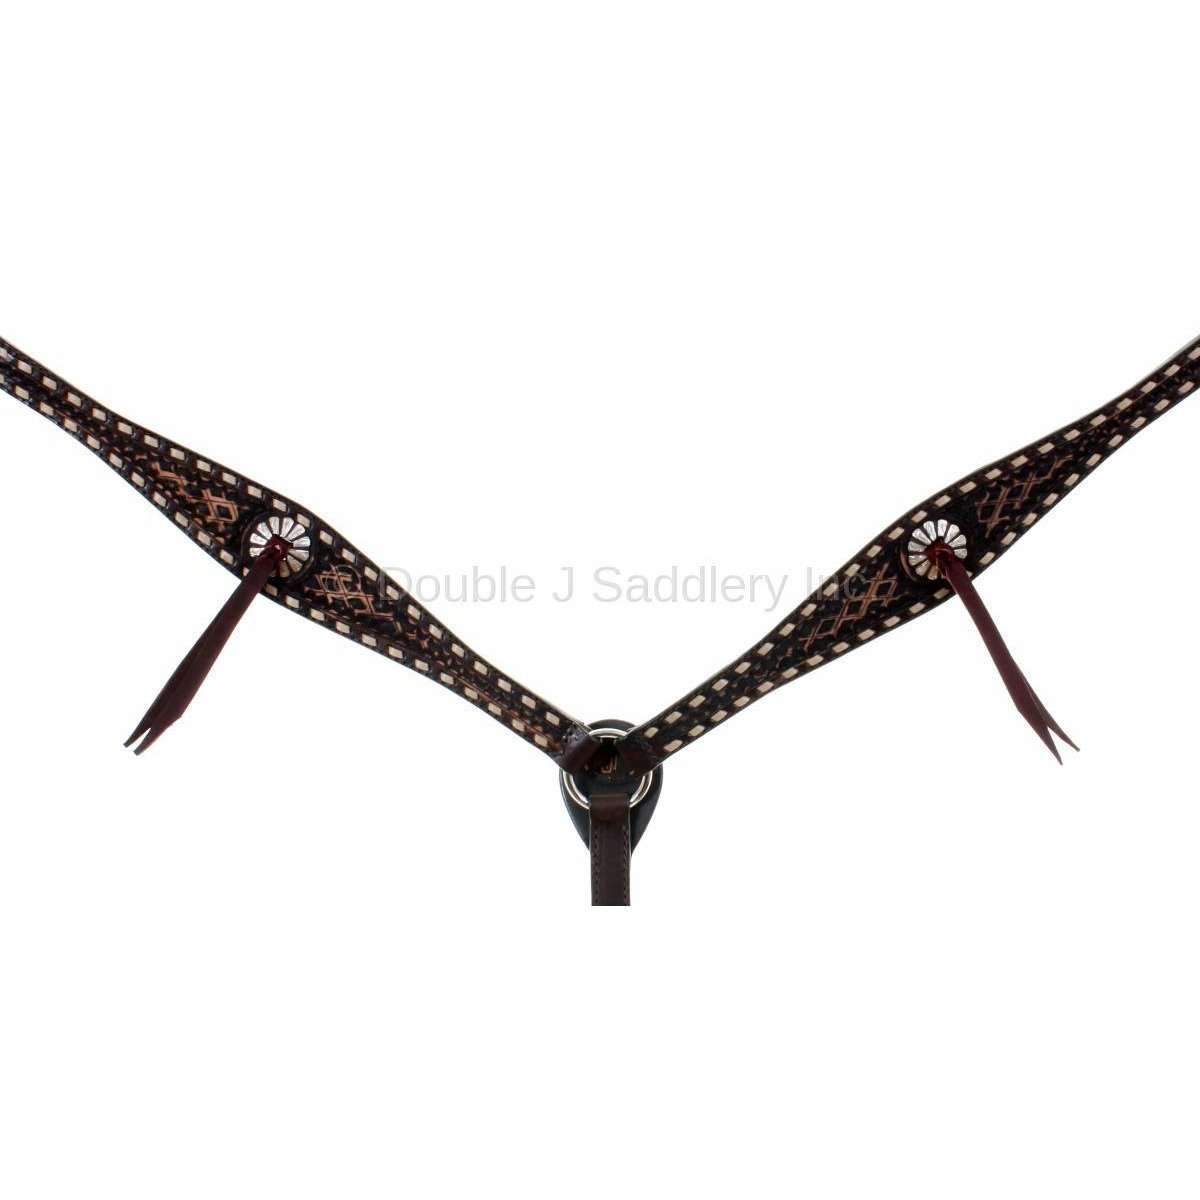 BC897 - Brown Vintage Breast Collar - Double J Saddlery